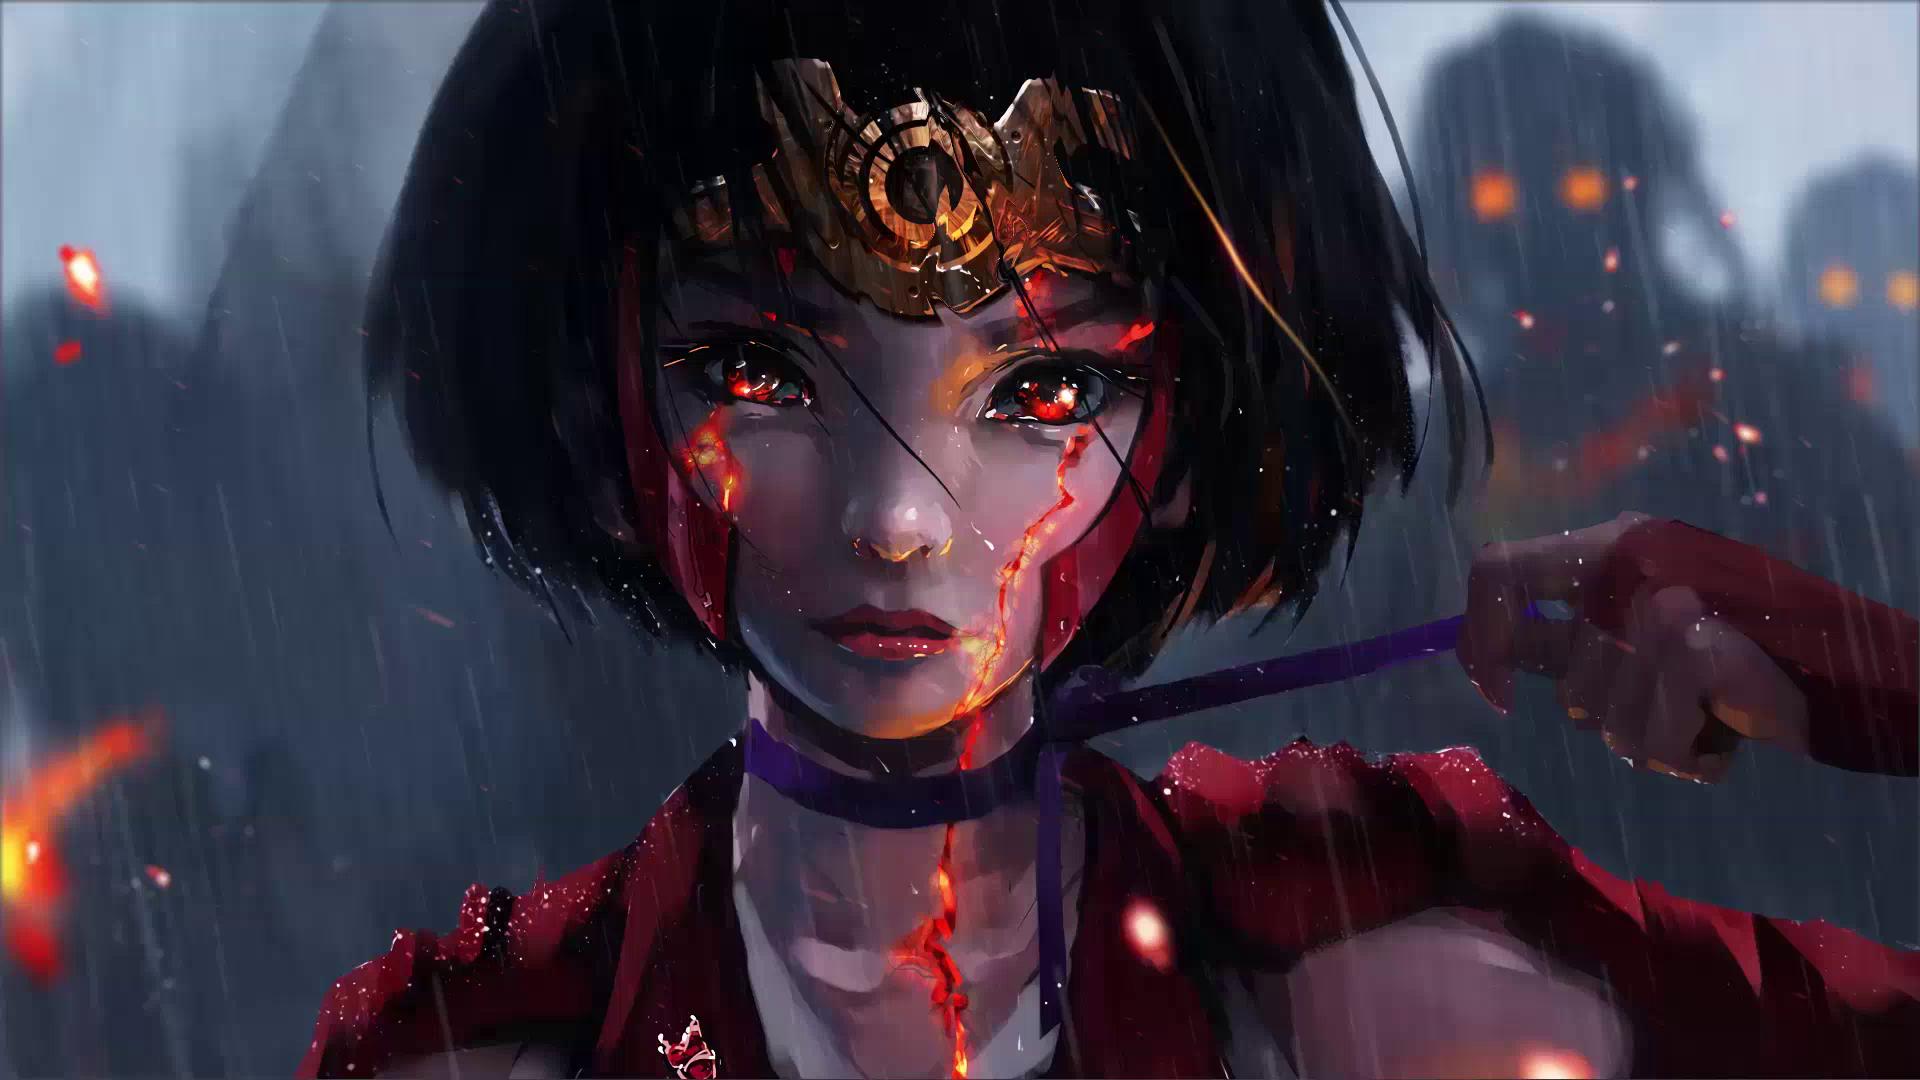 Anime Kabaneri of the Iron Fortress HD Wallpaper